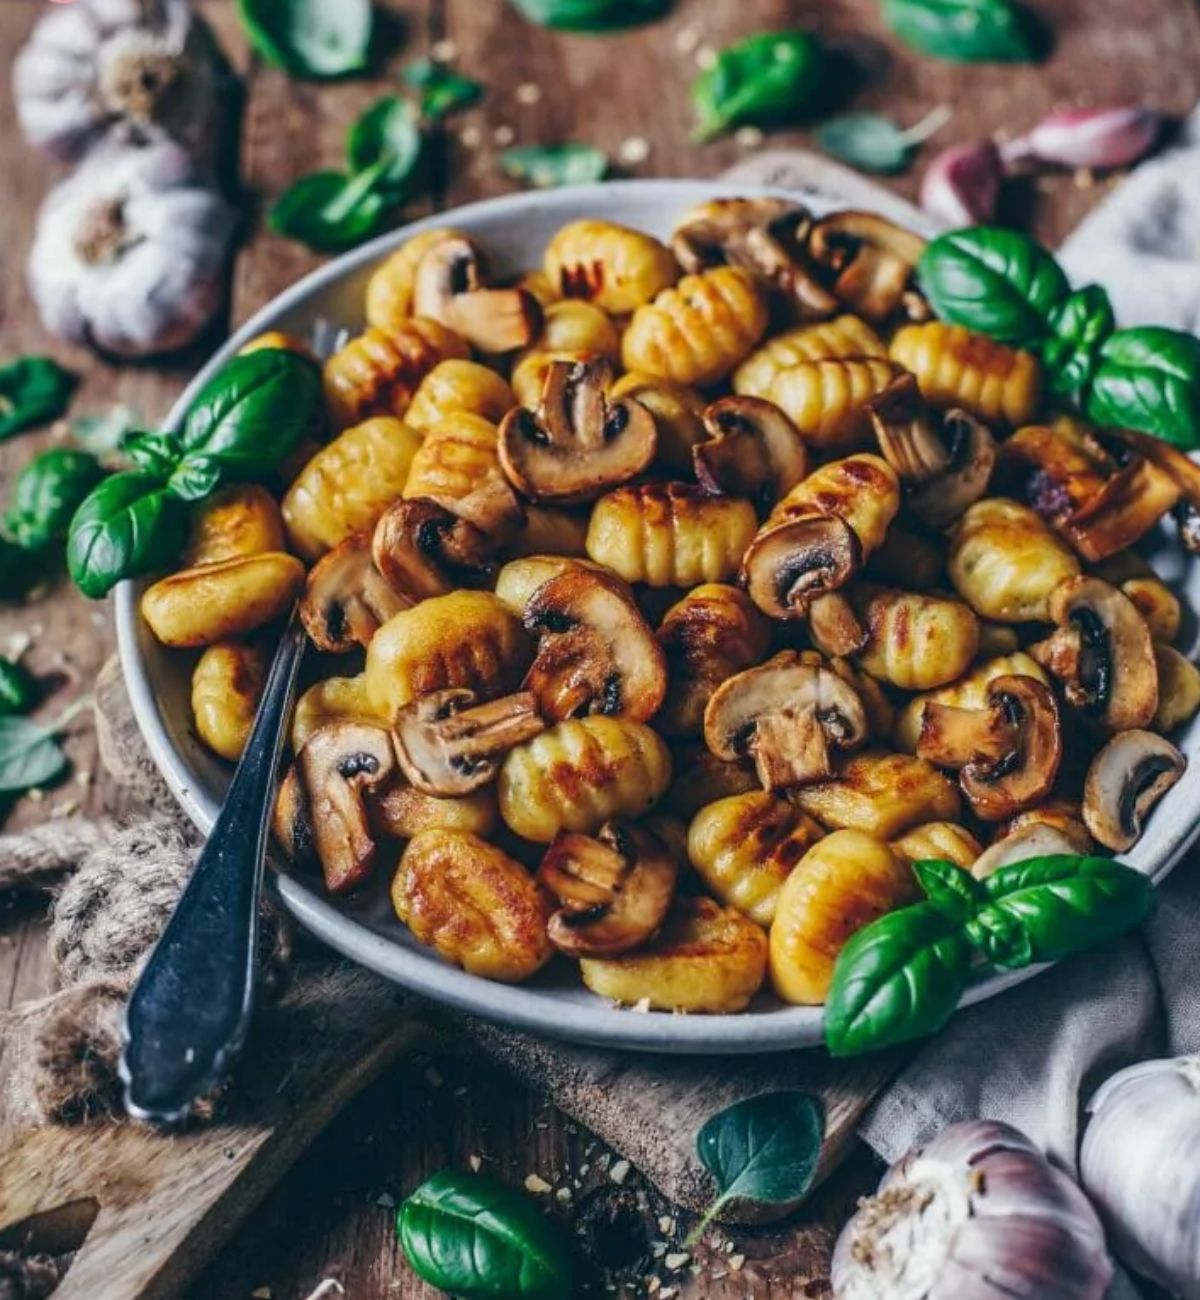 a plate of crispy roasted gocchi with garlic mushrooms, scattered with basil leaves